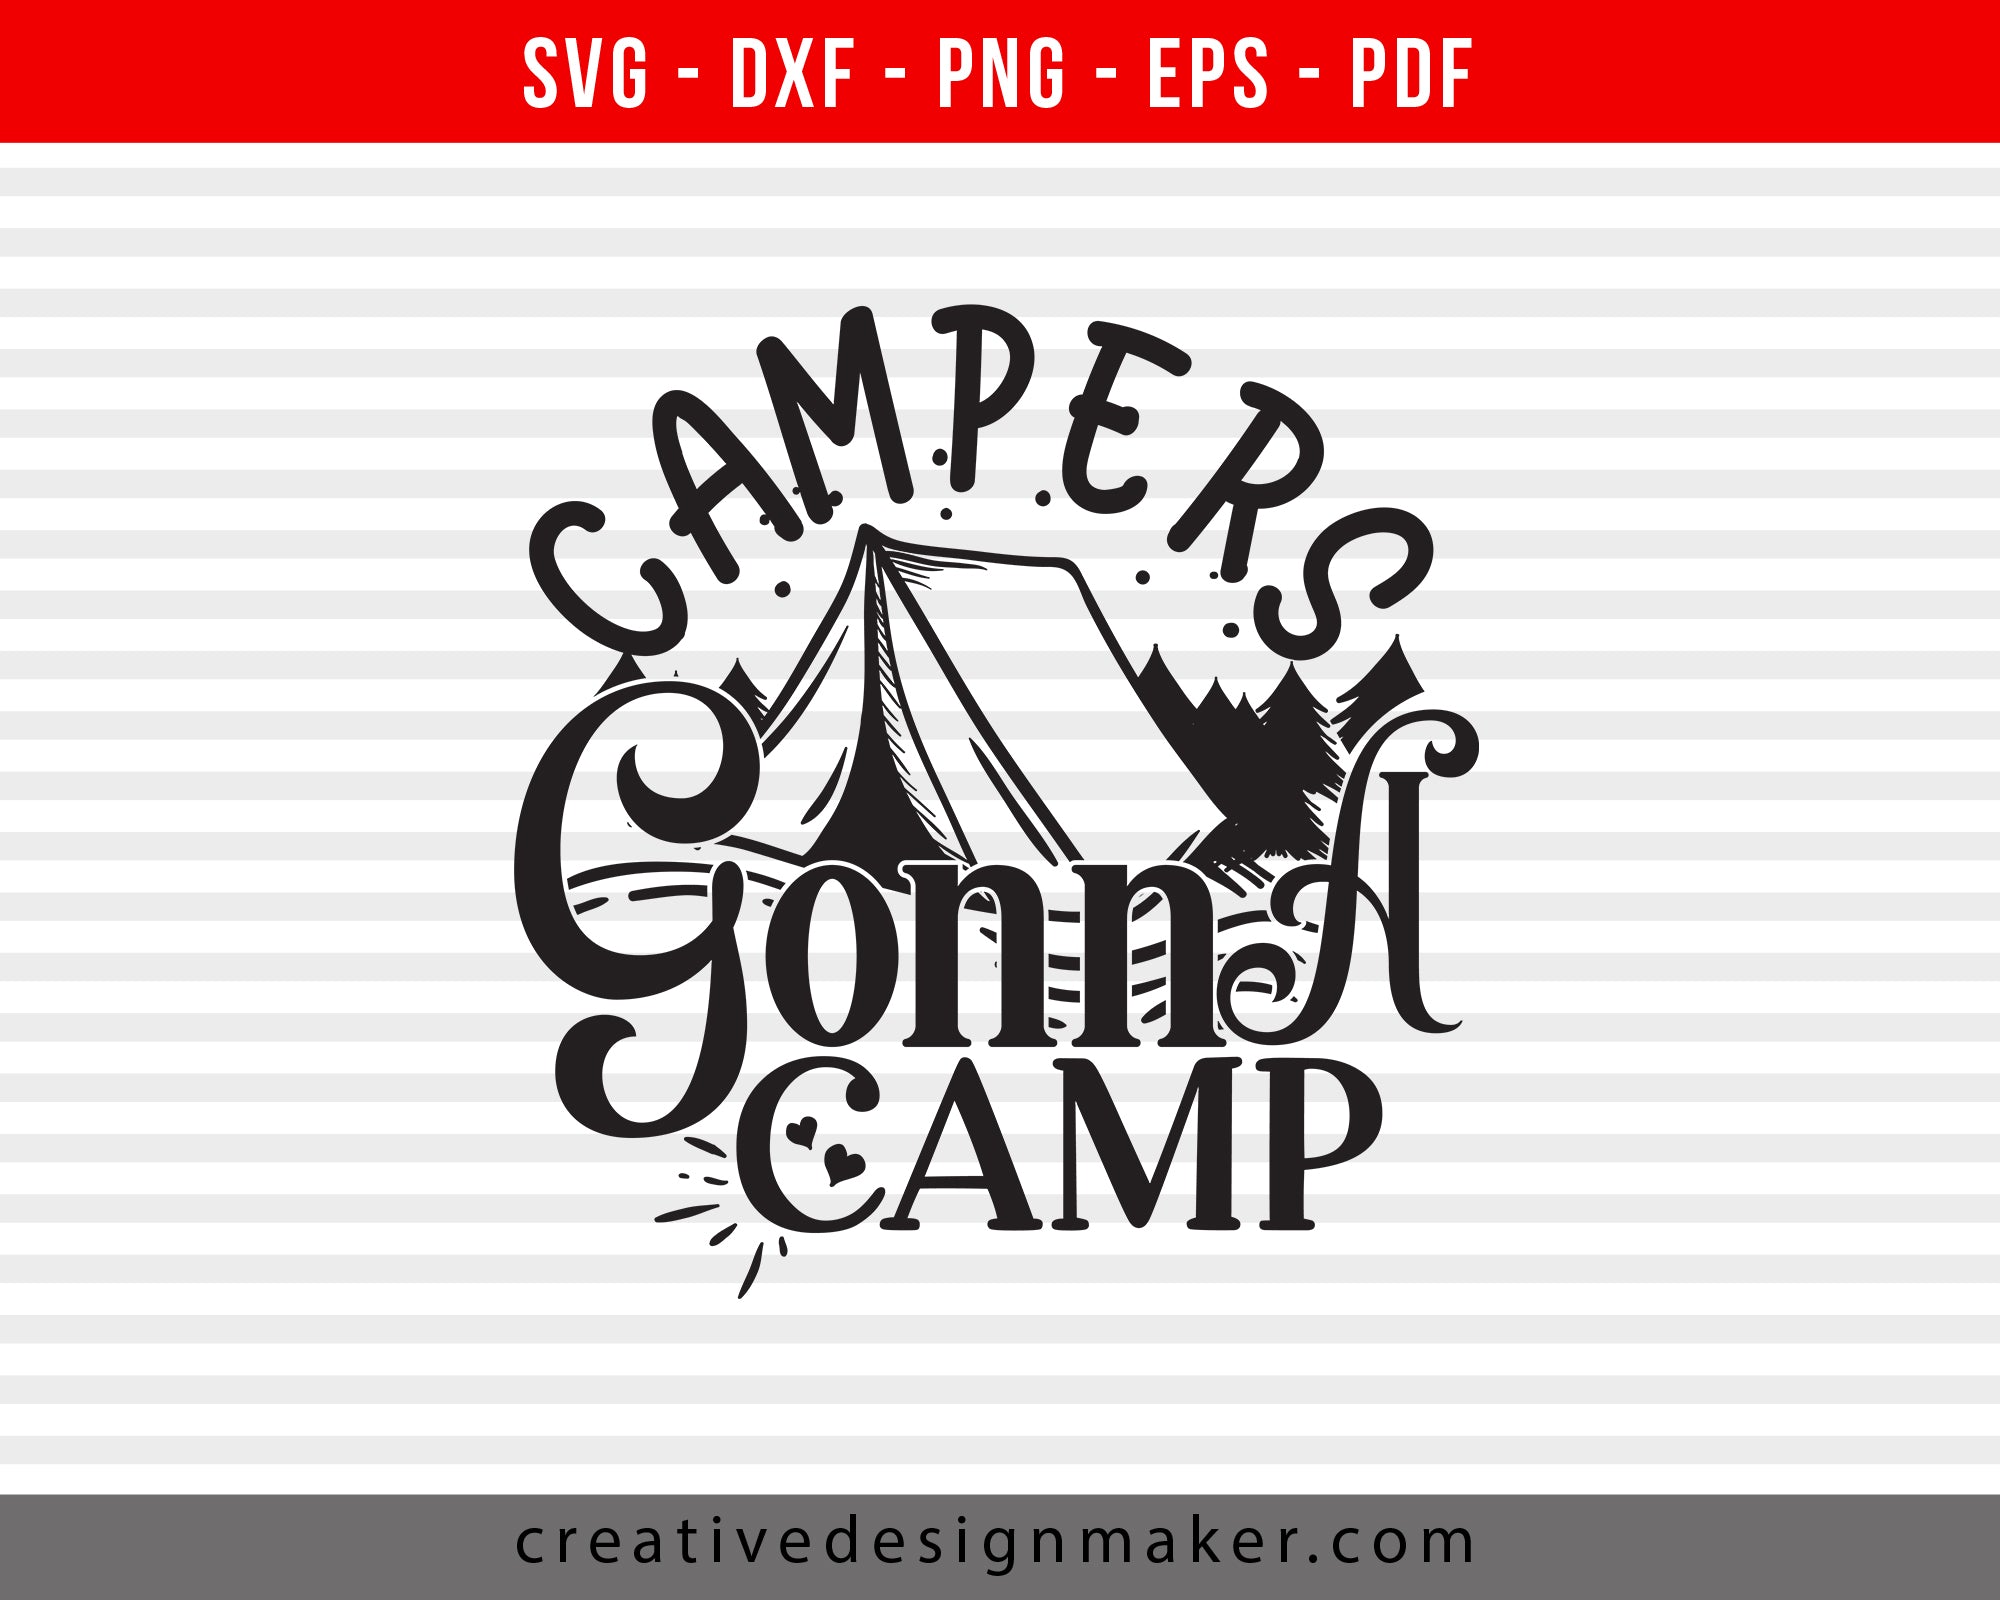 Campers Gonna Camp Camping Print Ready Editable T-Shirt SVG Design!